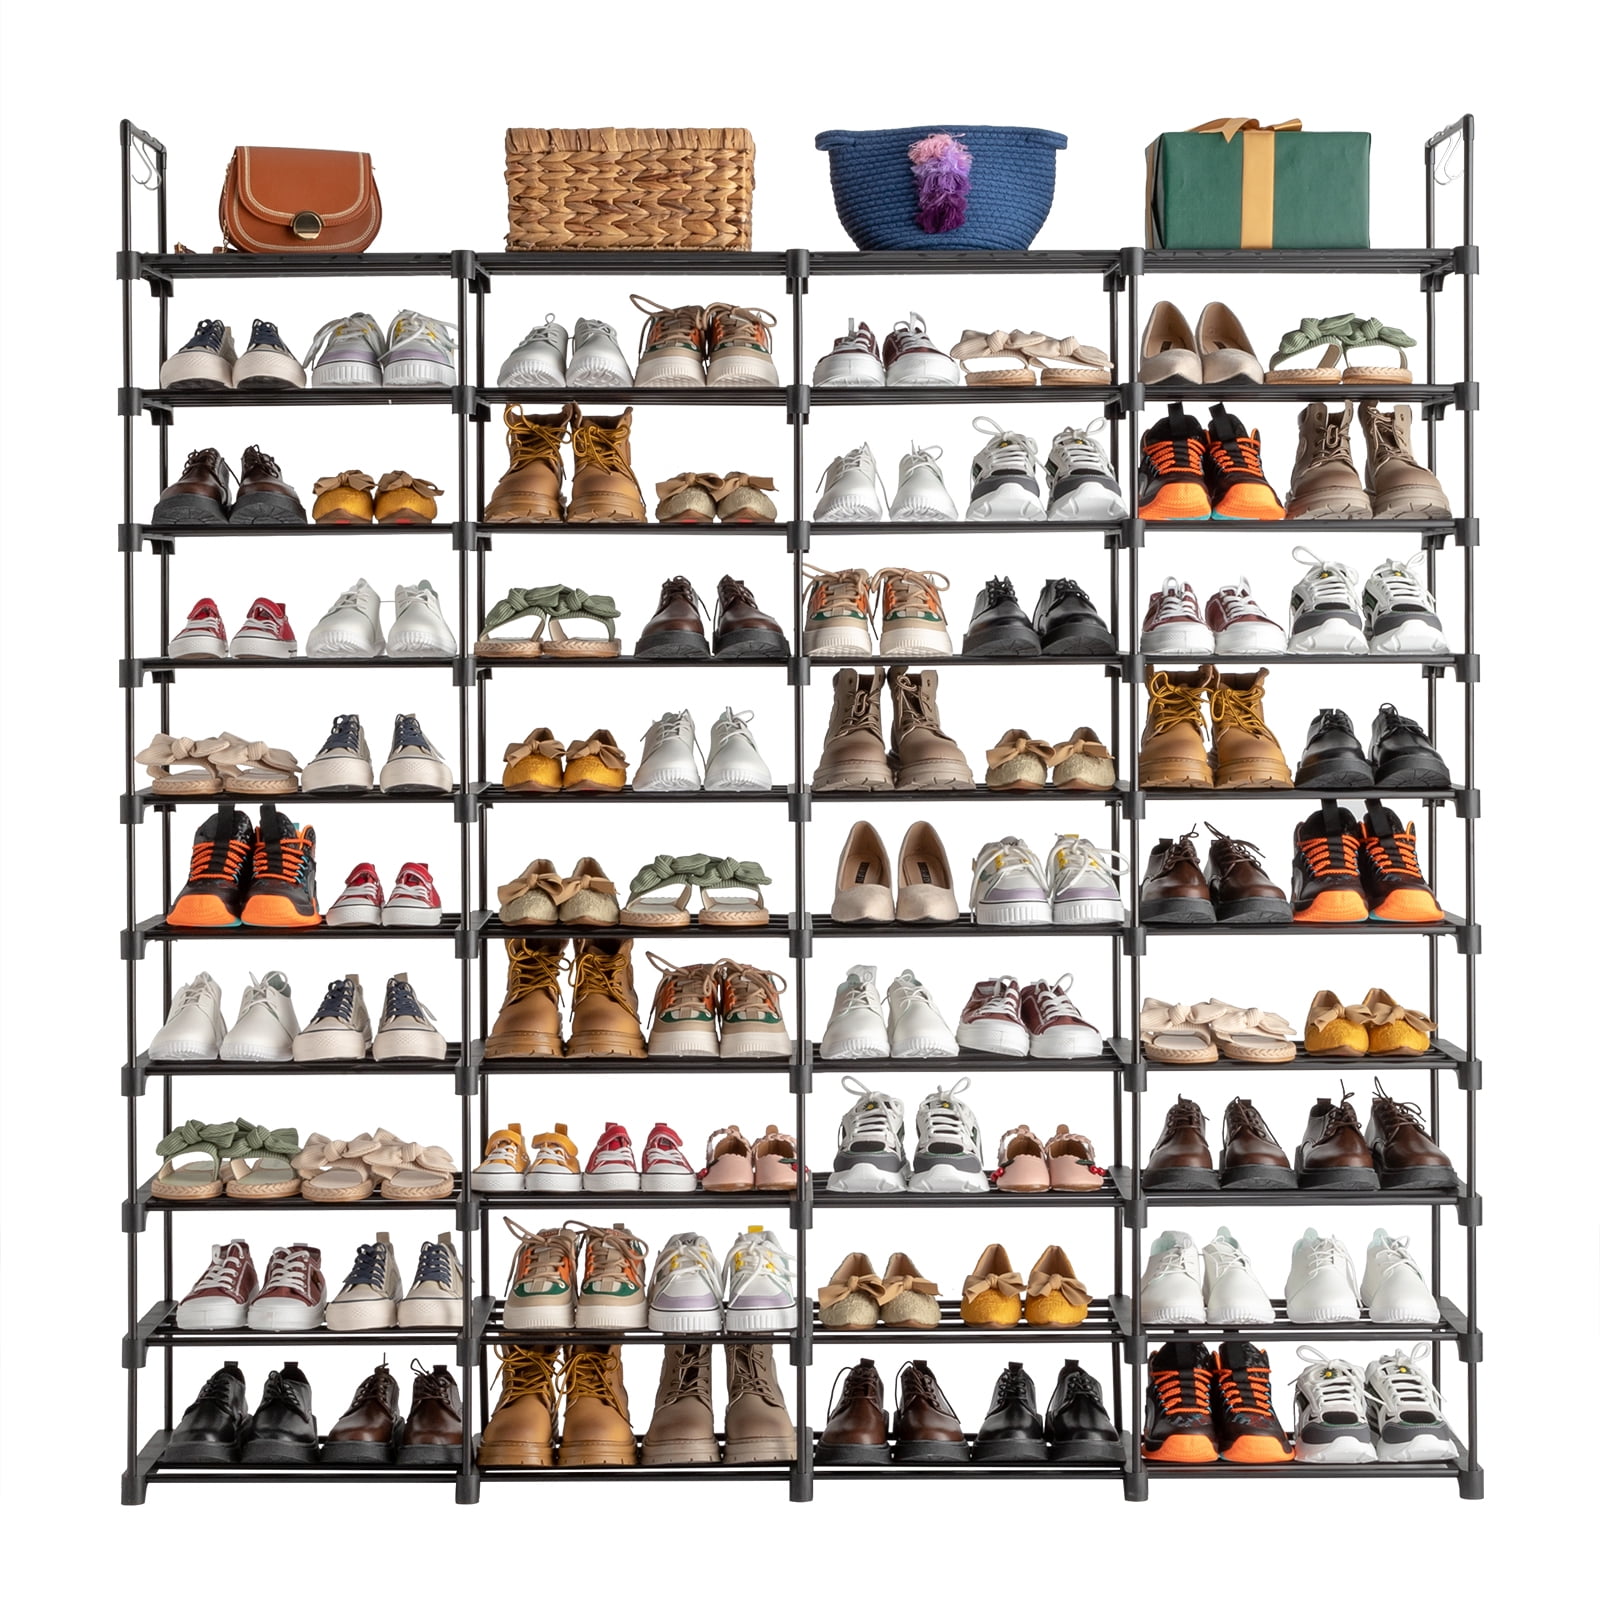 Large Shoe Rack Organizer - Tiered Storage Shoe Stand Tower for Sneakers, Heels, Flats, and Accessories by Lee Furniture - 4 Rows - 8 Tiers - Black